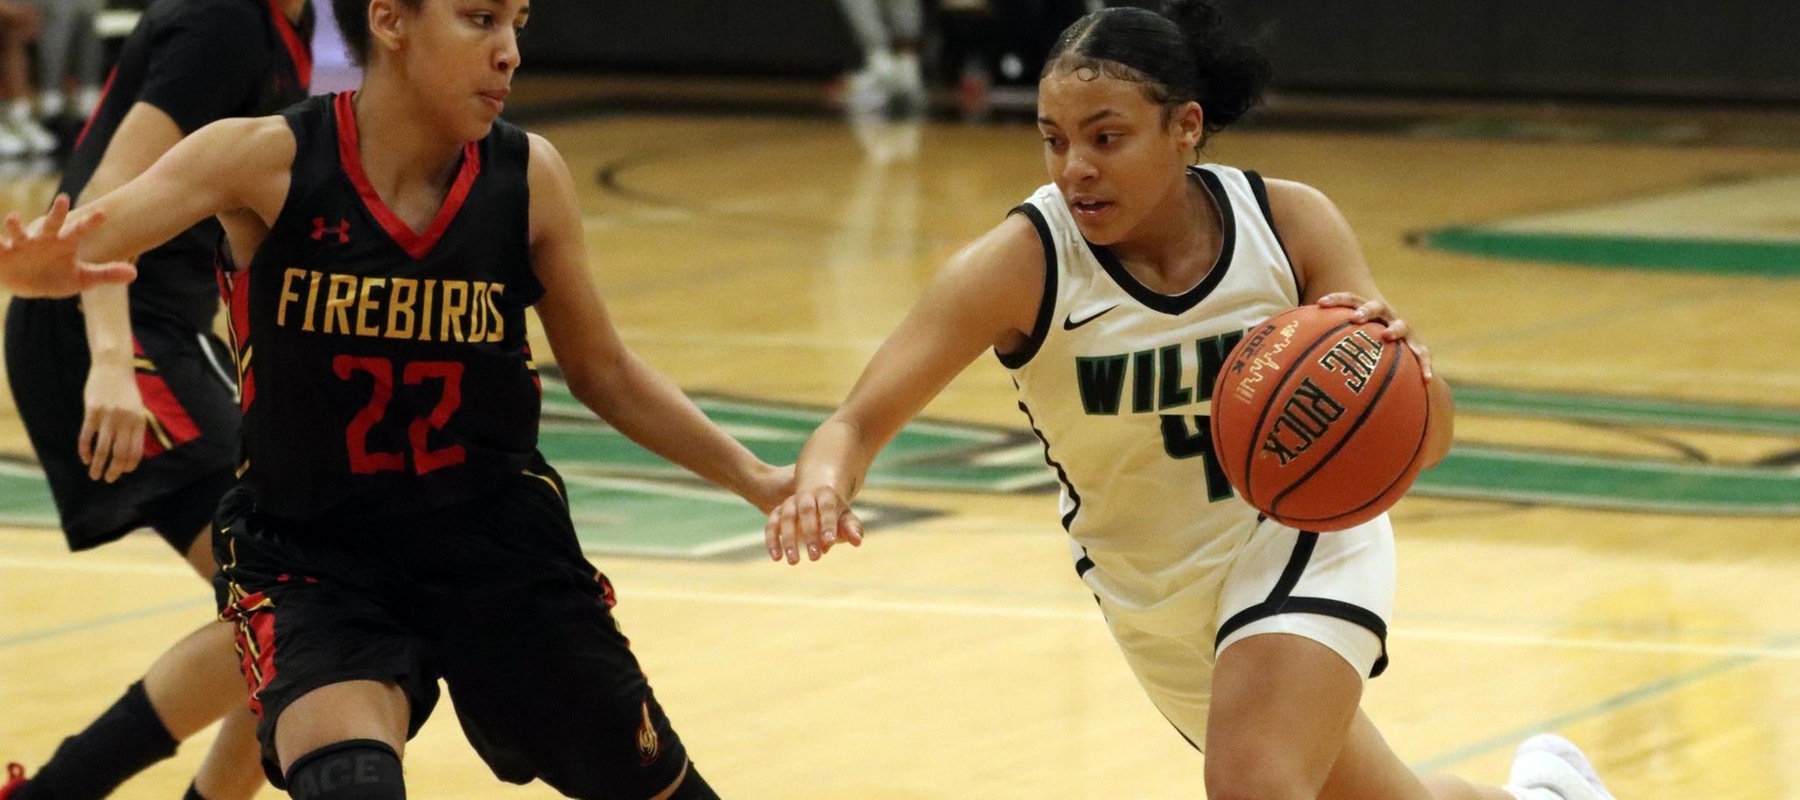 File photo of Amber Washington who had a game-high 19 points against Saint Rose. Copyright 2022; Wilmington University. All rights reserved. Photo by Dan Lauletta. November 11, 2022 vs. the District of Columbia.